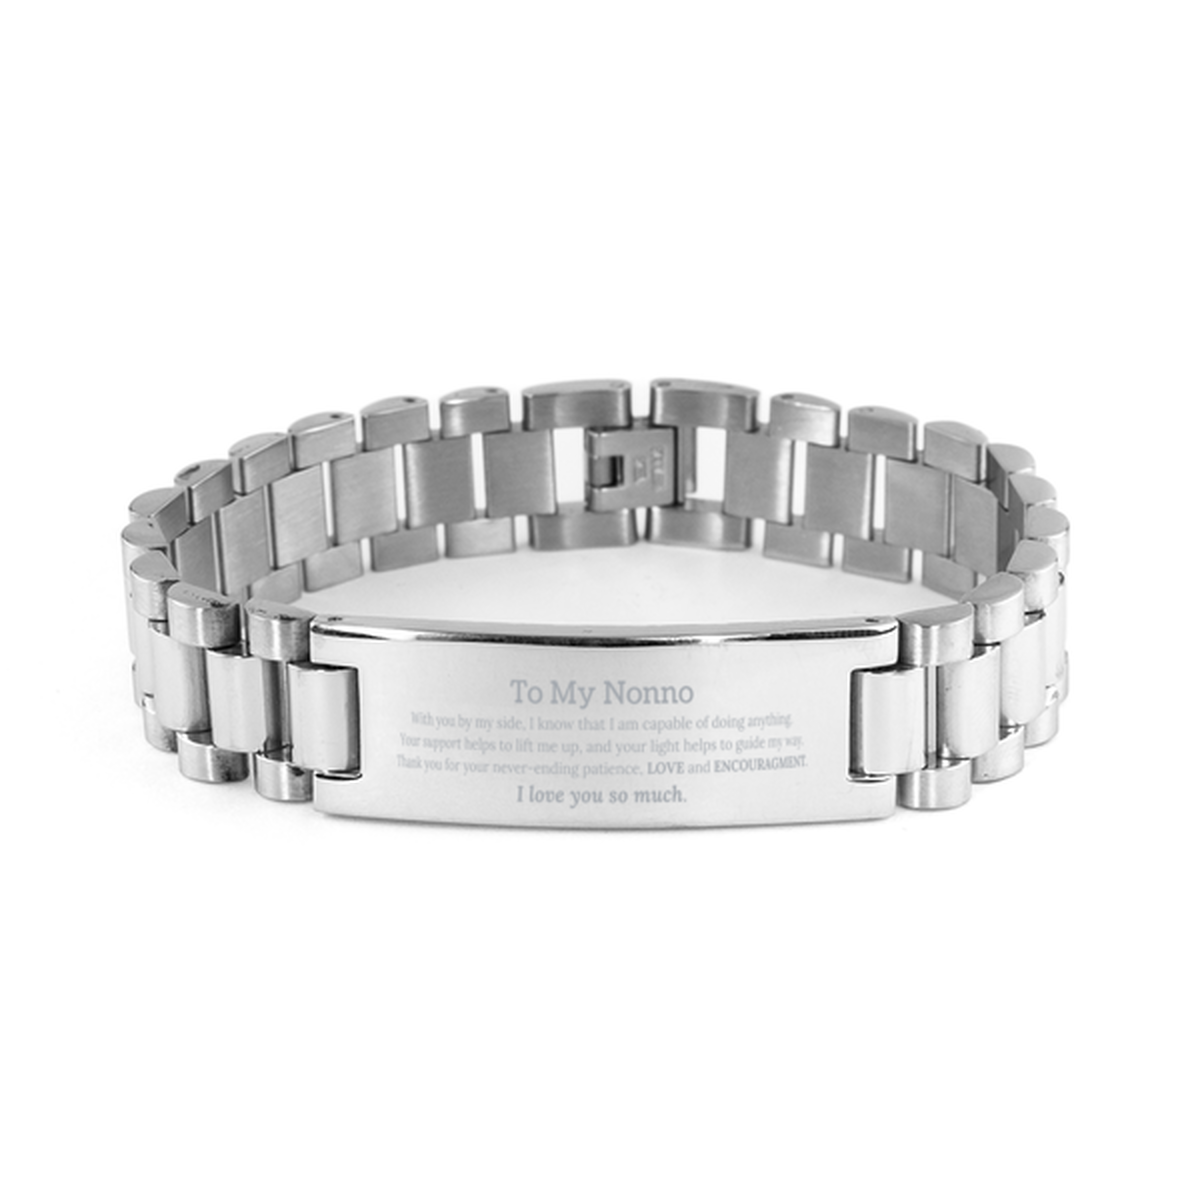 Appreciation Nonno Ladder Stainless Steel Bracelet Gifts, To My Nonno Birthday Christmas Wedding Keepsake Gifts for Nonno With you by my side, I know that I am capable of doing anything. I love you so much